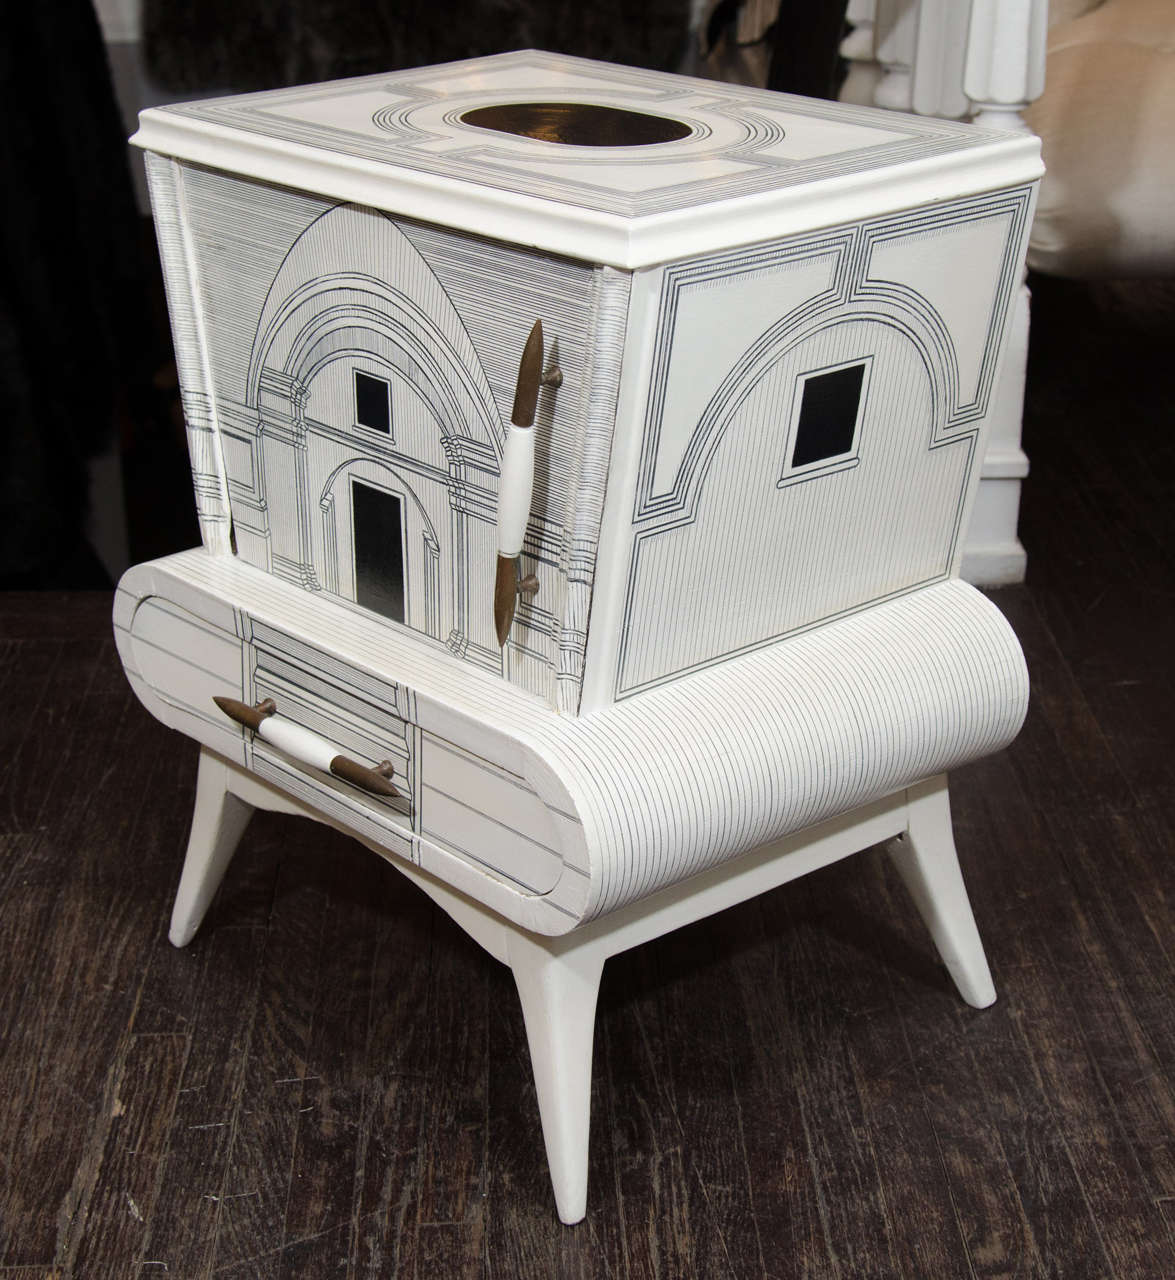 Pair of vintage nightstands in the style of Fornasetti.